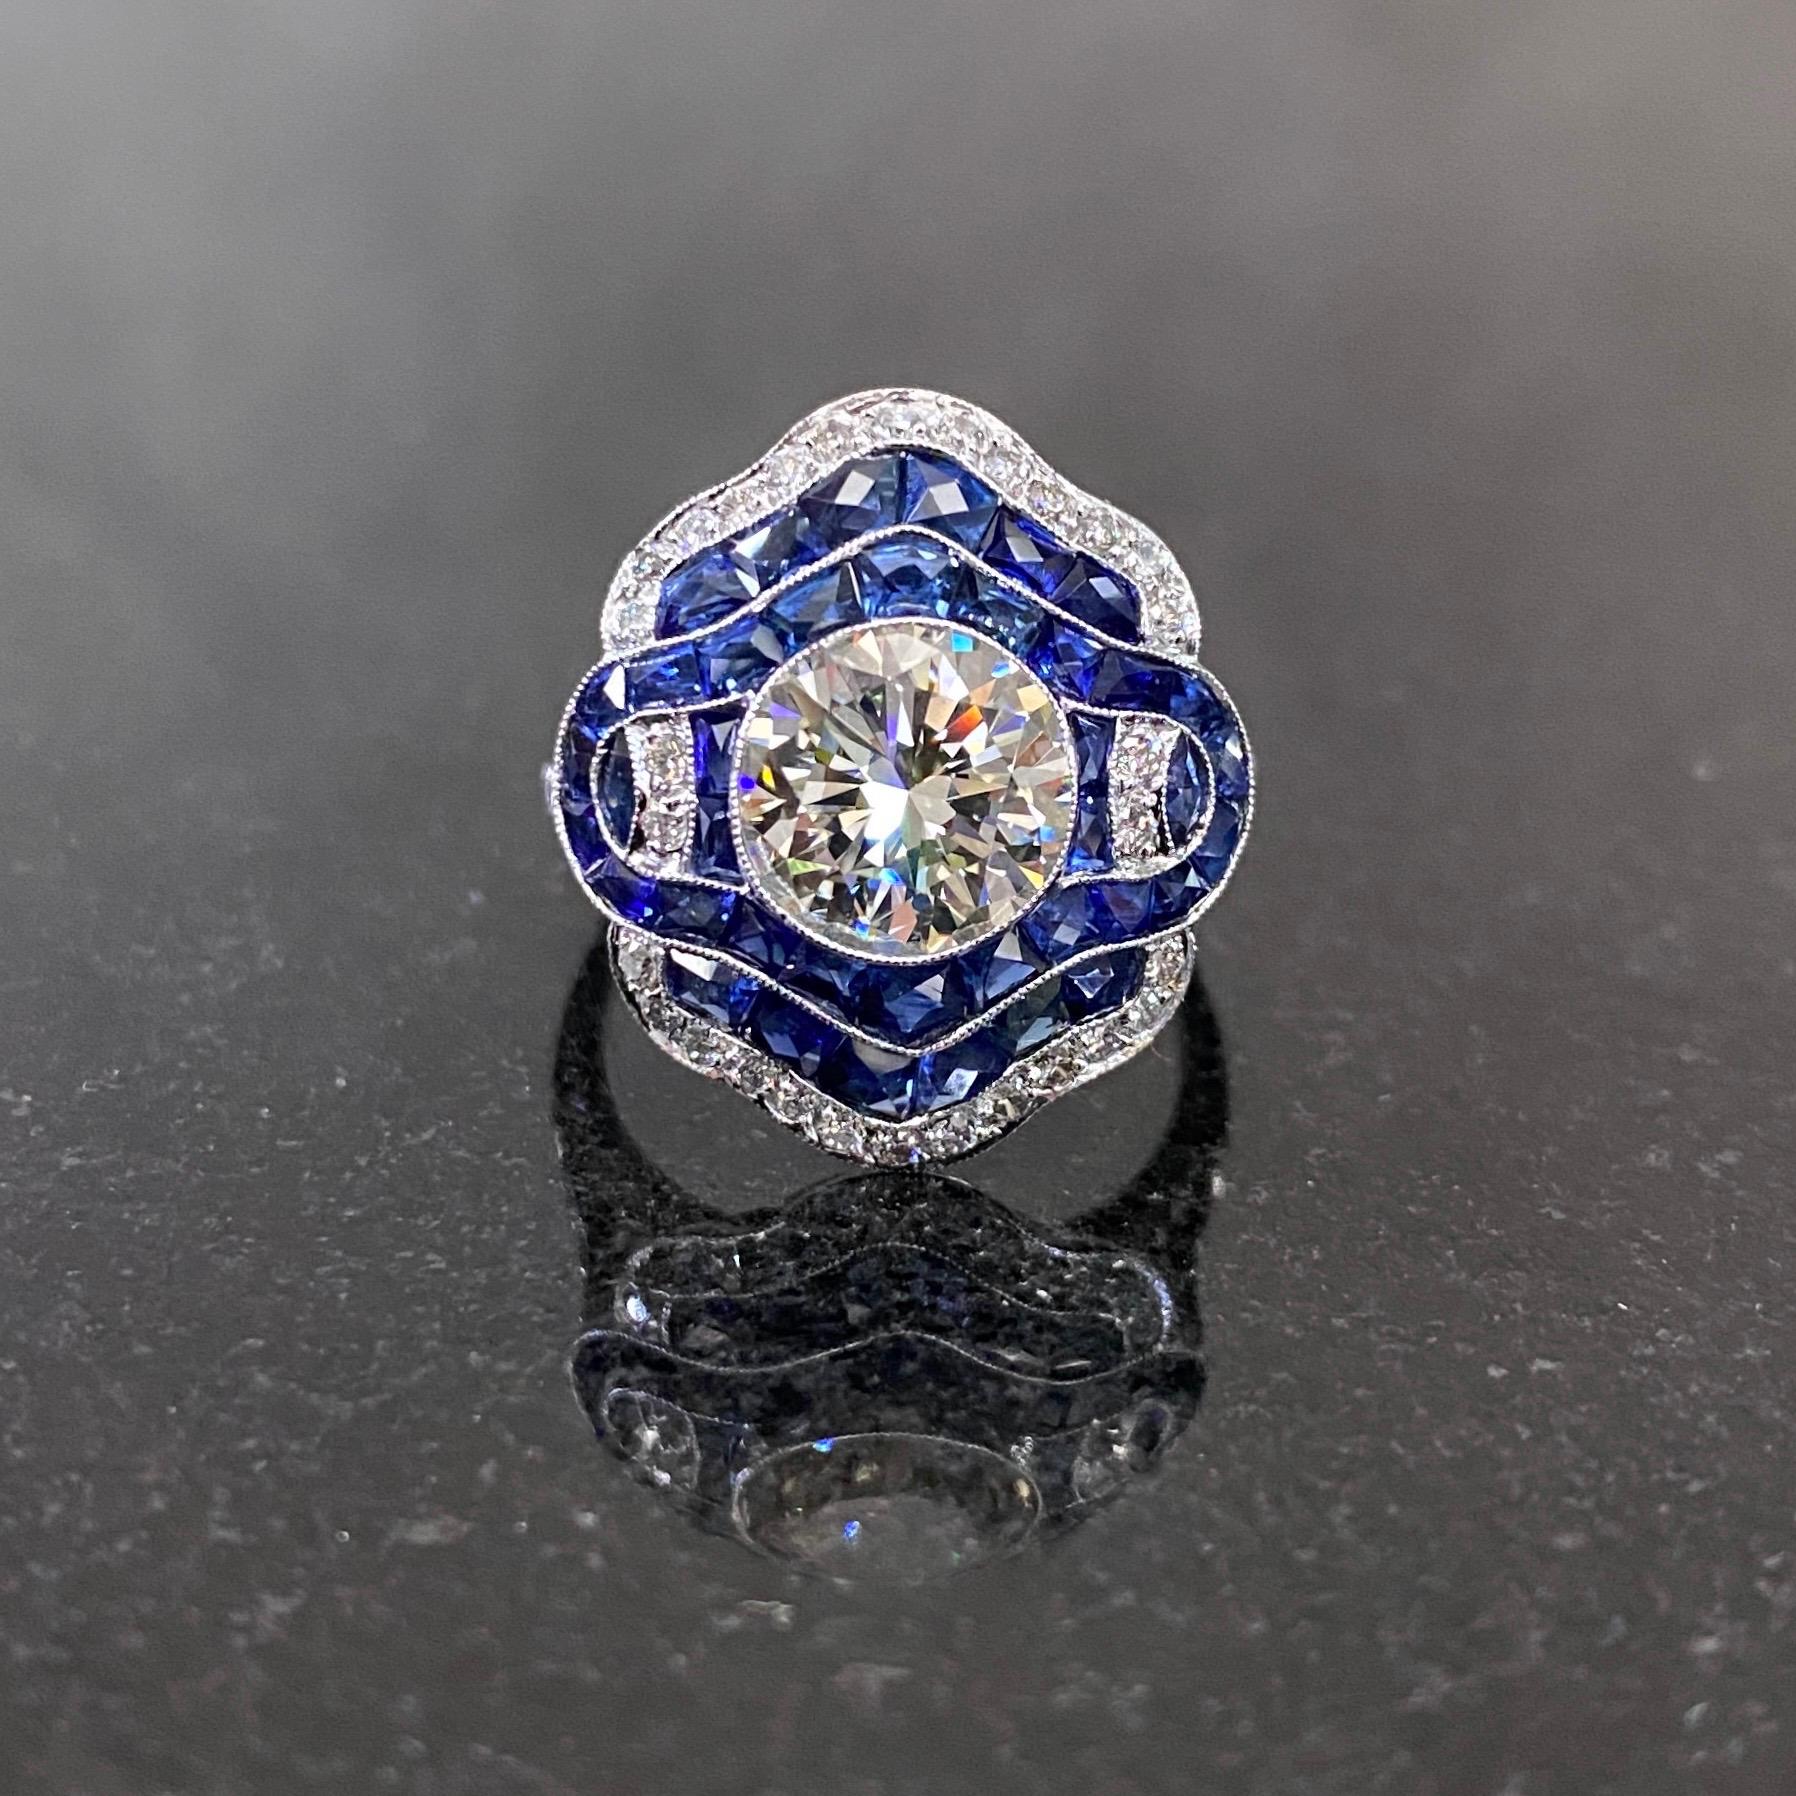 Art Deco Style diamond and sapphire target stylized engagement or cocktail/dress ring in platinum, 2000s. This ring features a round brilliant-cut diamond millegrain-set to the center, surrounded by several rows of channel-set and grain-set